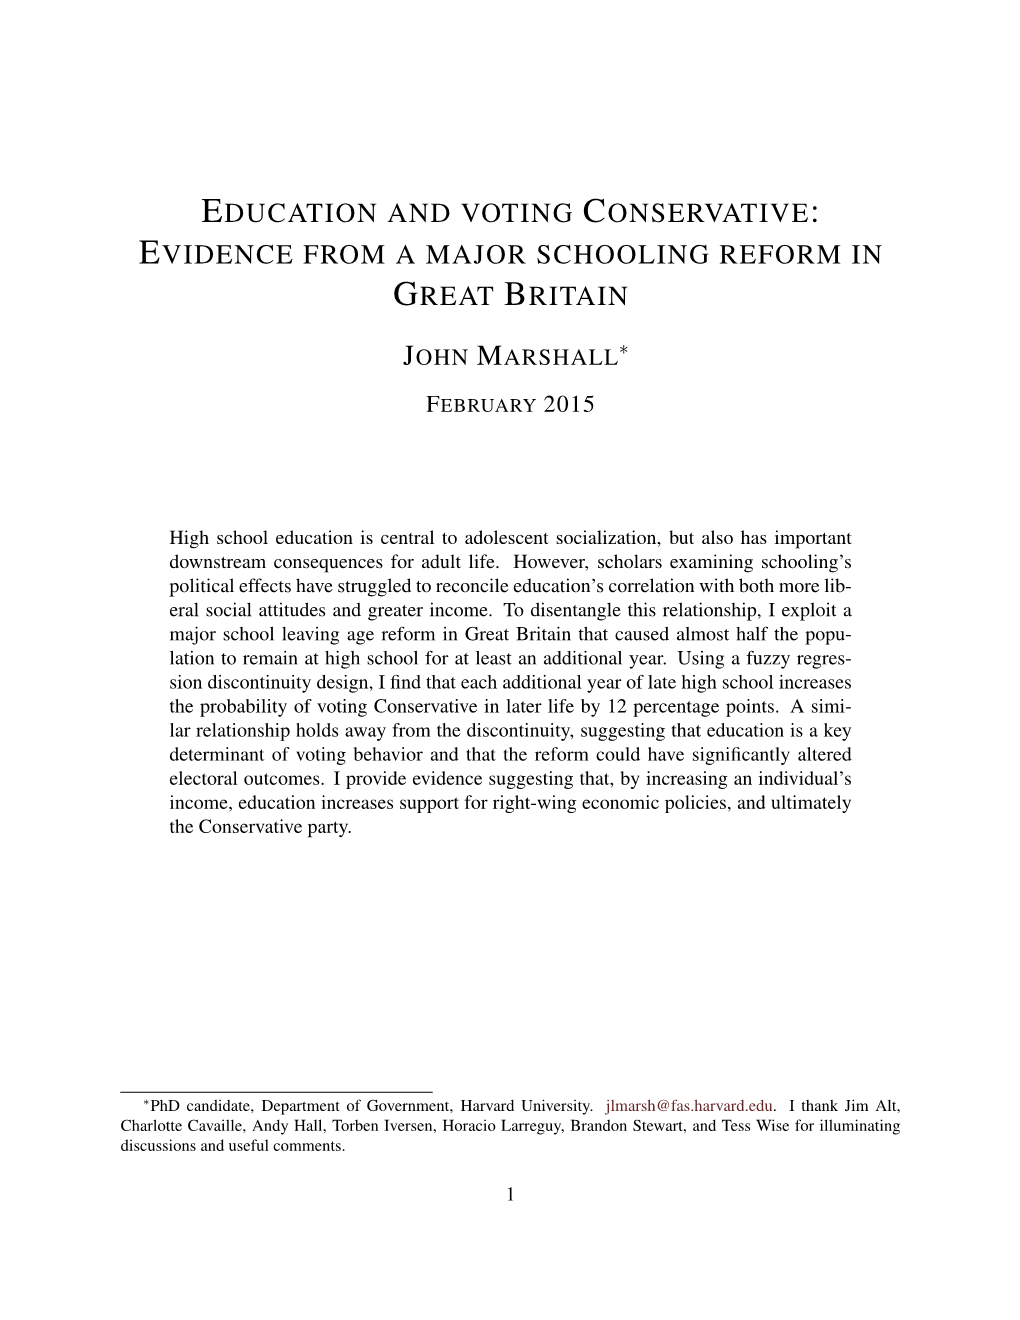 Education and Voting Conservative: Evidencefromamajorschoolingreformin Great Britain